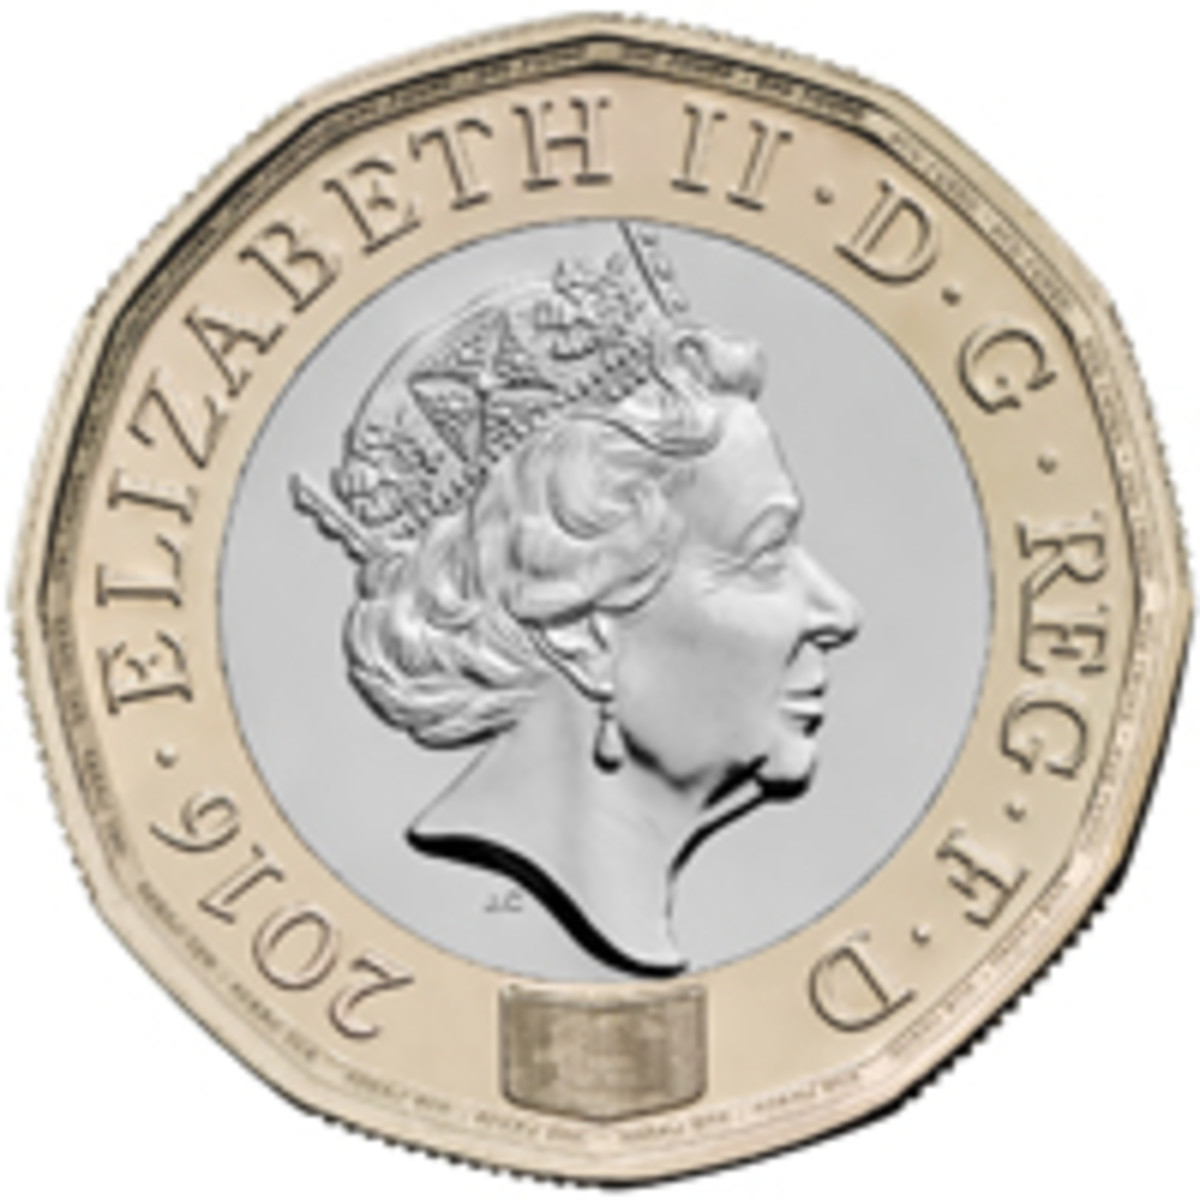  Britain's new 12-sided ringed bimetallic £1 coin with a holographic device and micro-text imbedded into part of the design.